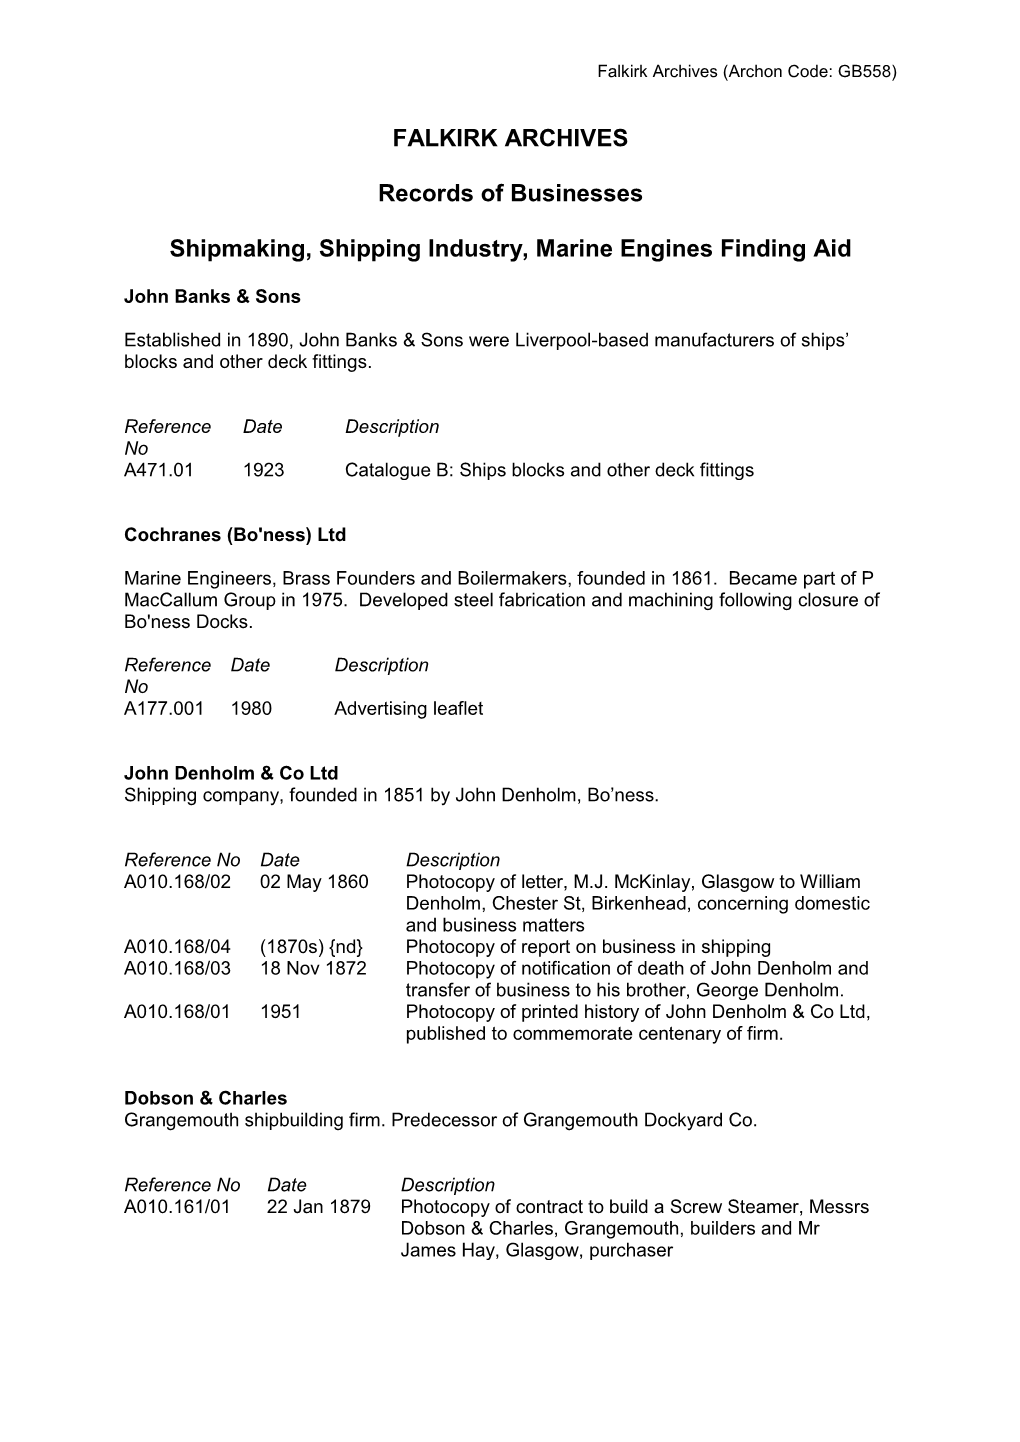 Shipbuilders, Shipmakers, Shipping Industry and Marine Engines Finding